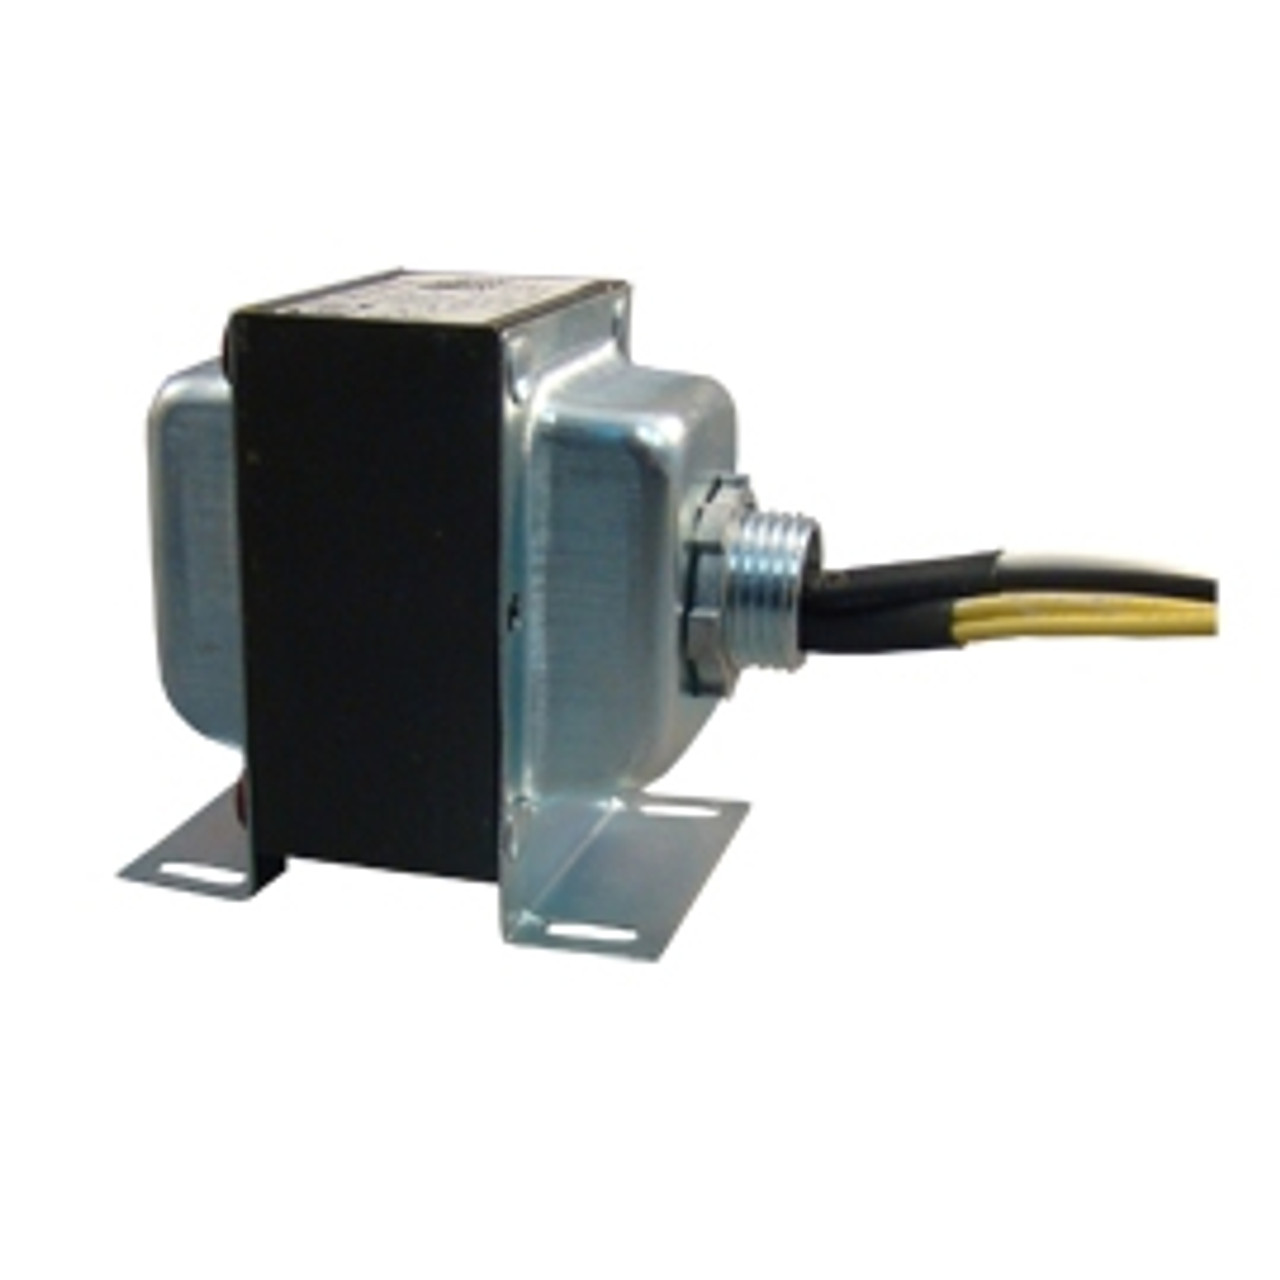 FUNCTIONAL DEVICES FUNTR50VA001US Transformer US made 50VA, 120-24V, 1 hub, Class 2 UL Listed US/Can,3A Fuse